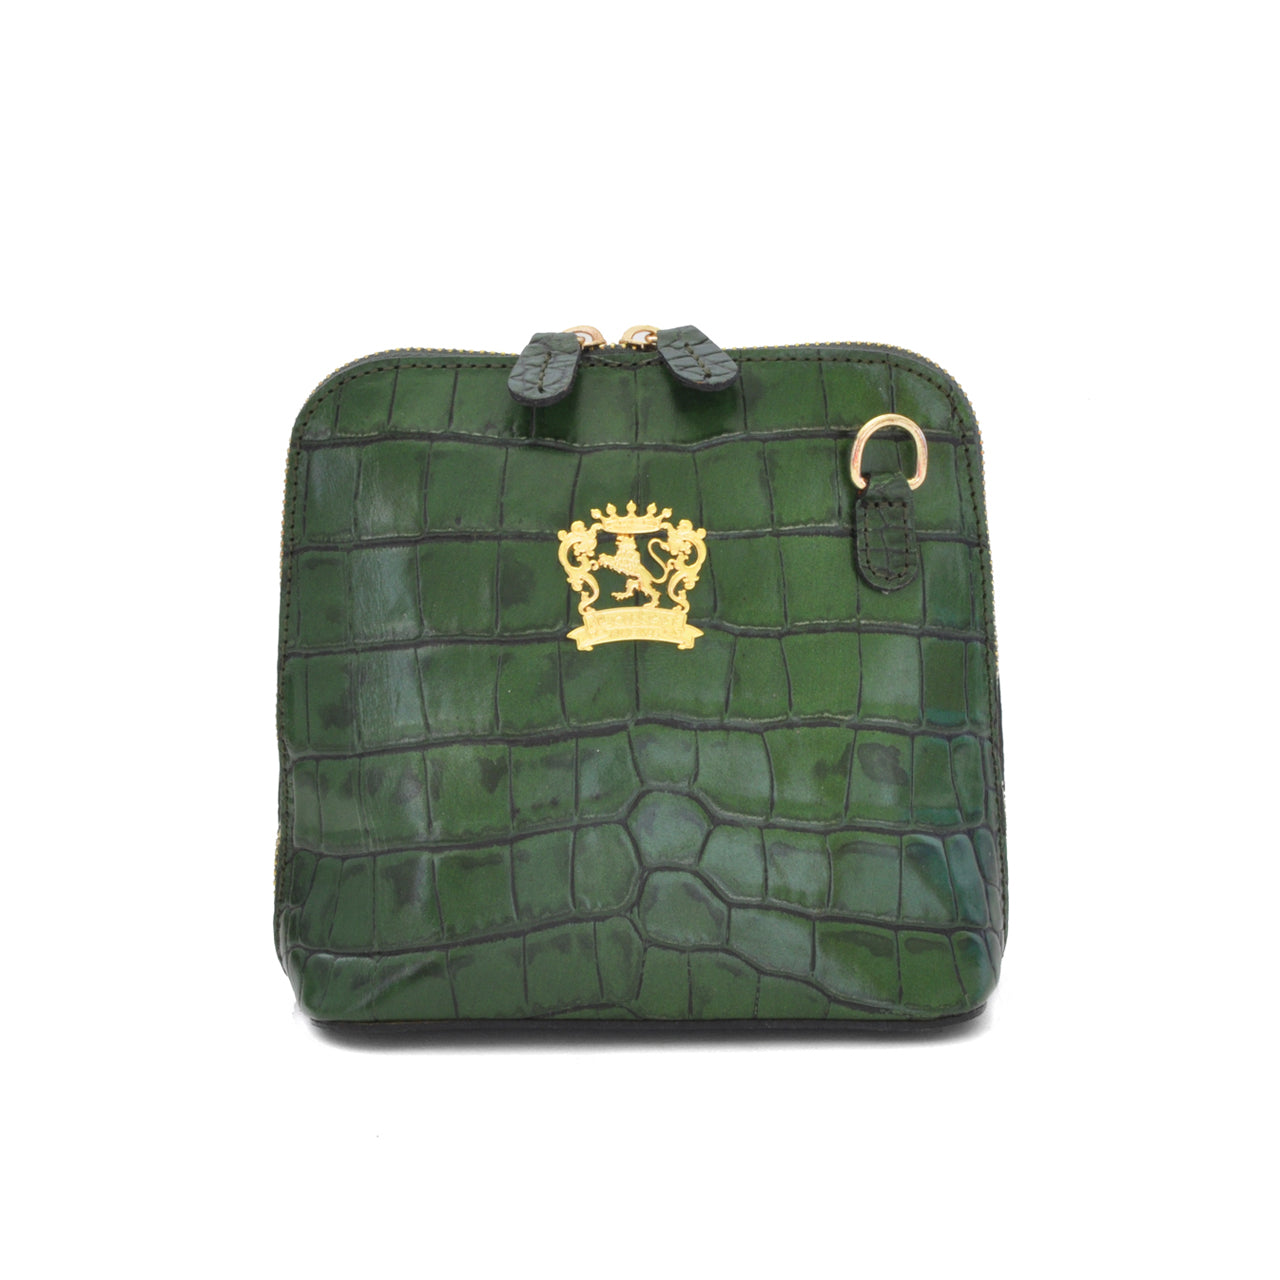 Pratesi Volterra King Lady Bag in real leather - Croco Embossed Leather Green